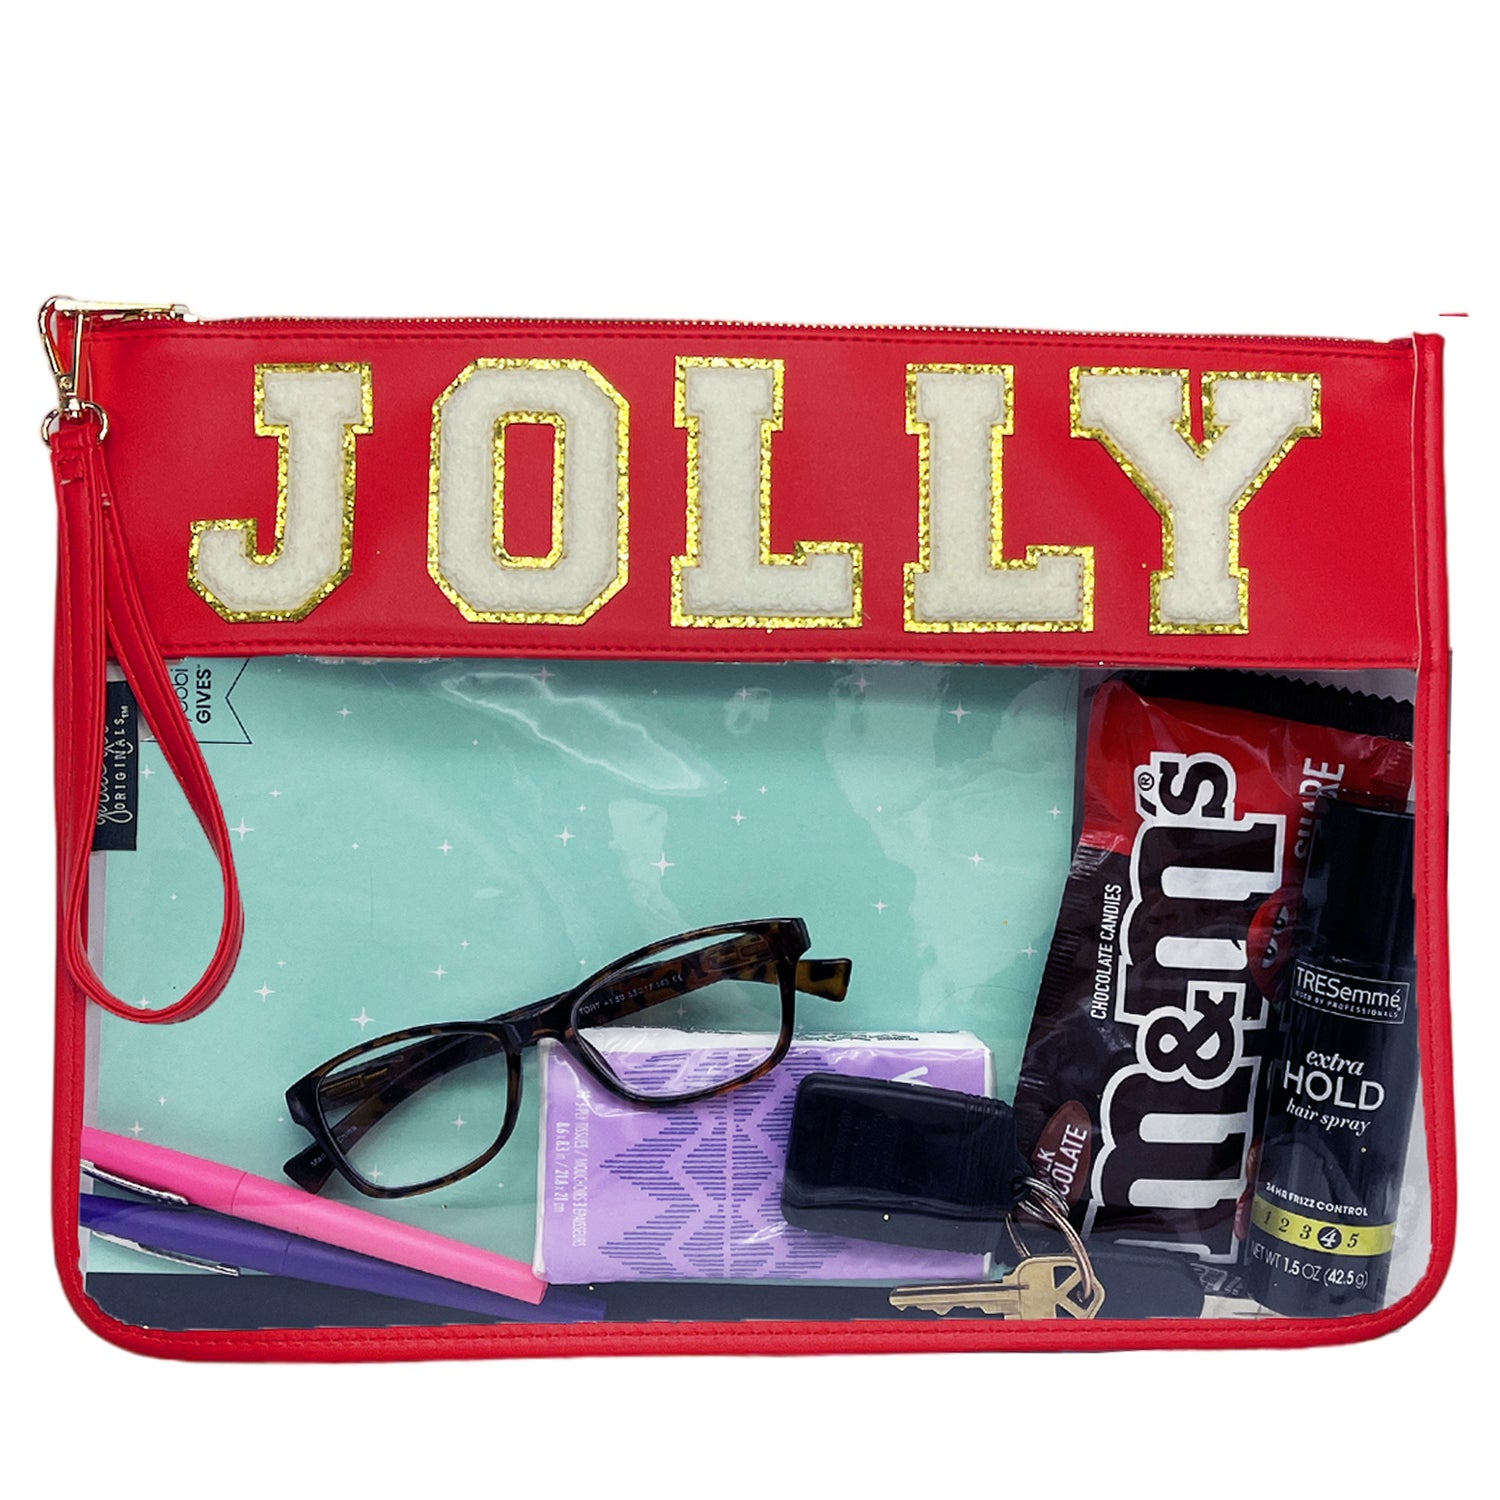 CP-1217 Jolly Red Candy Bag